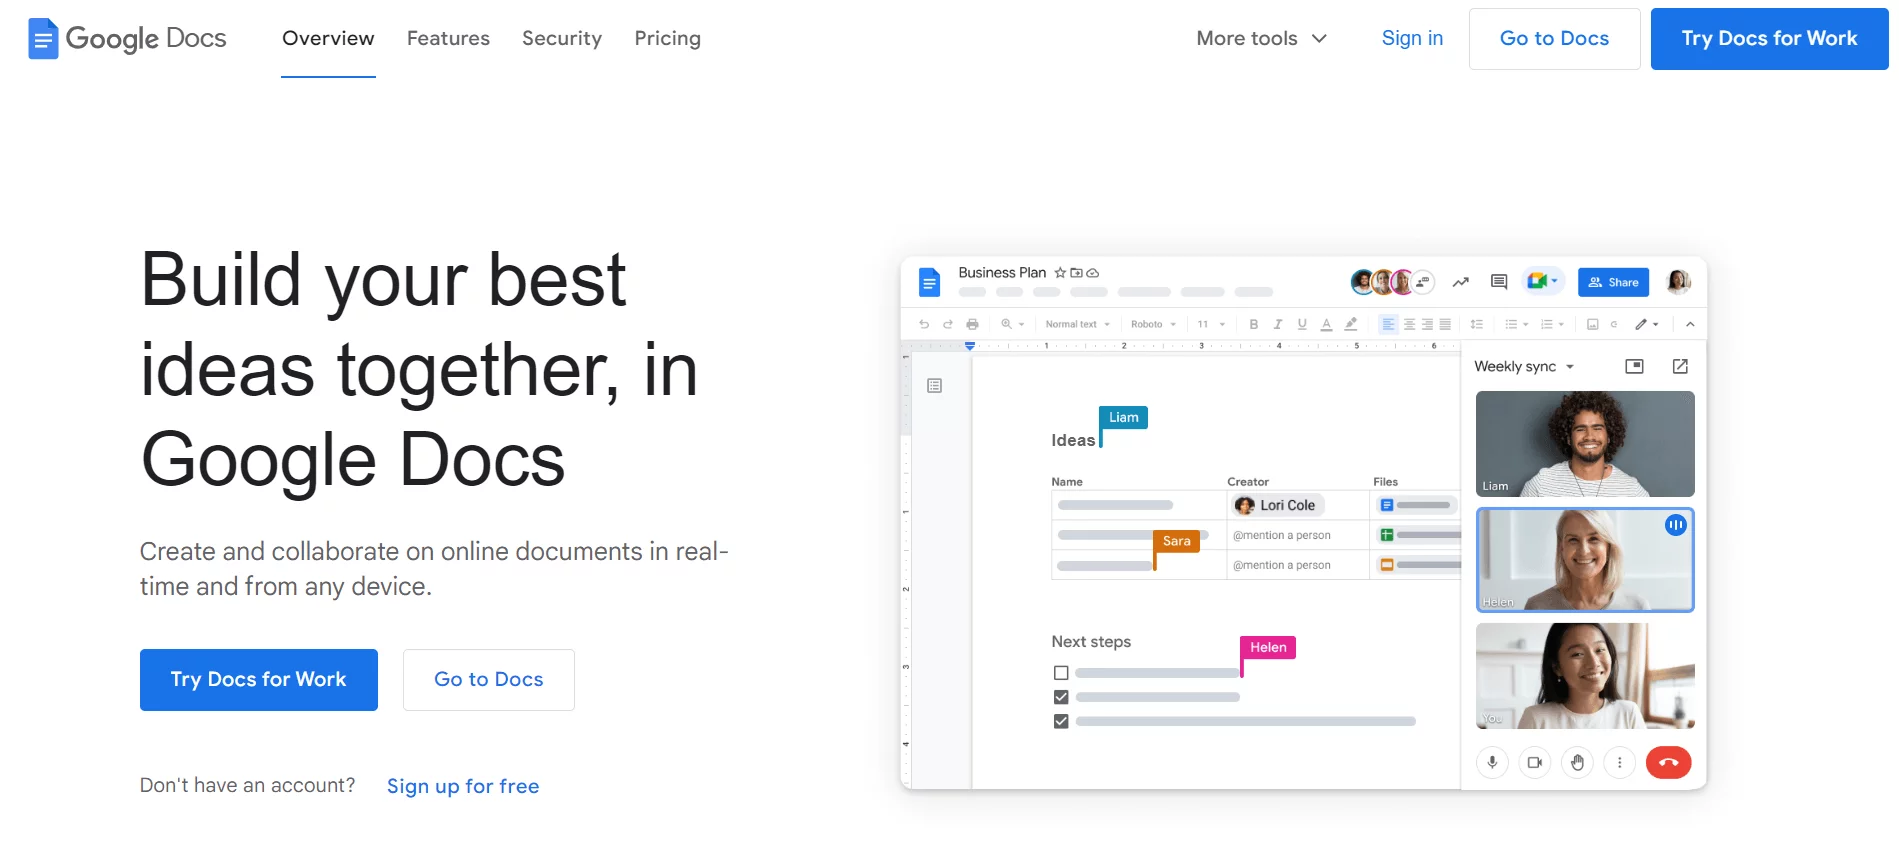 Google Docs homepage promoting real-time online document collaboration with features for video calls and team editing.